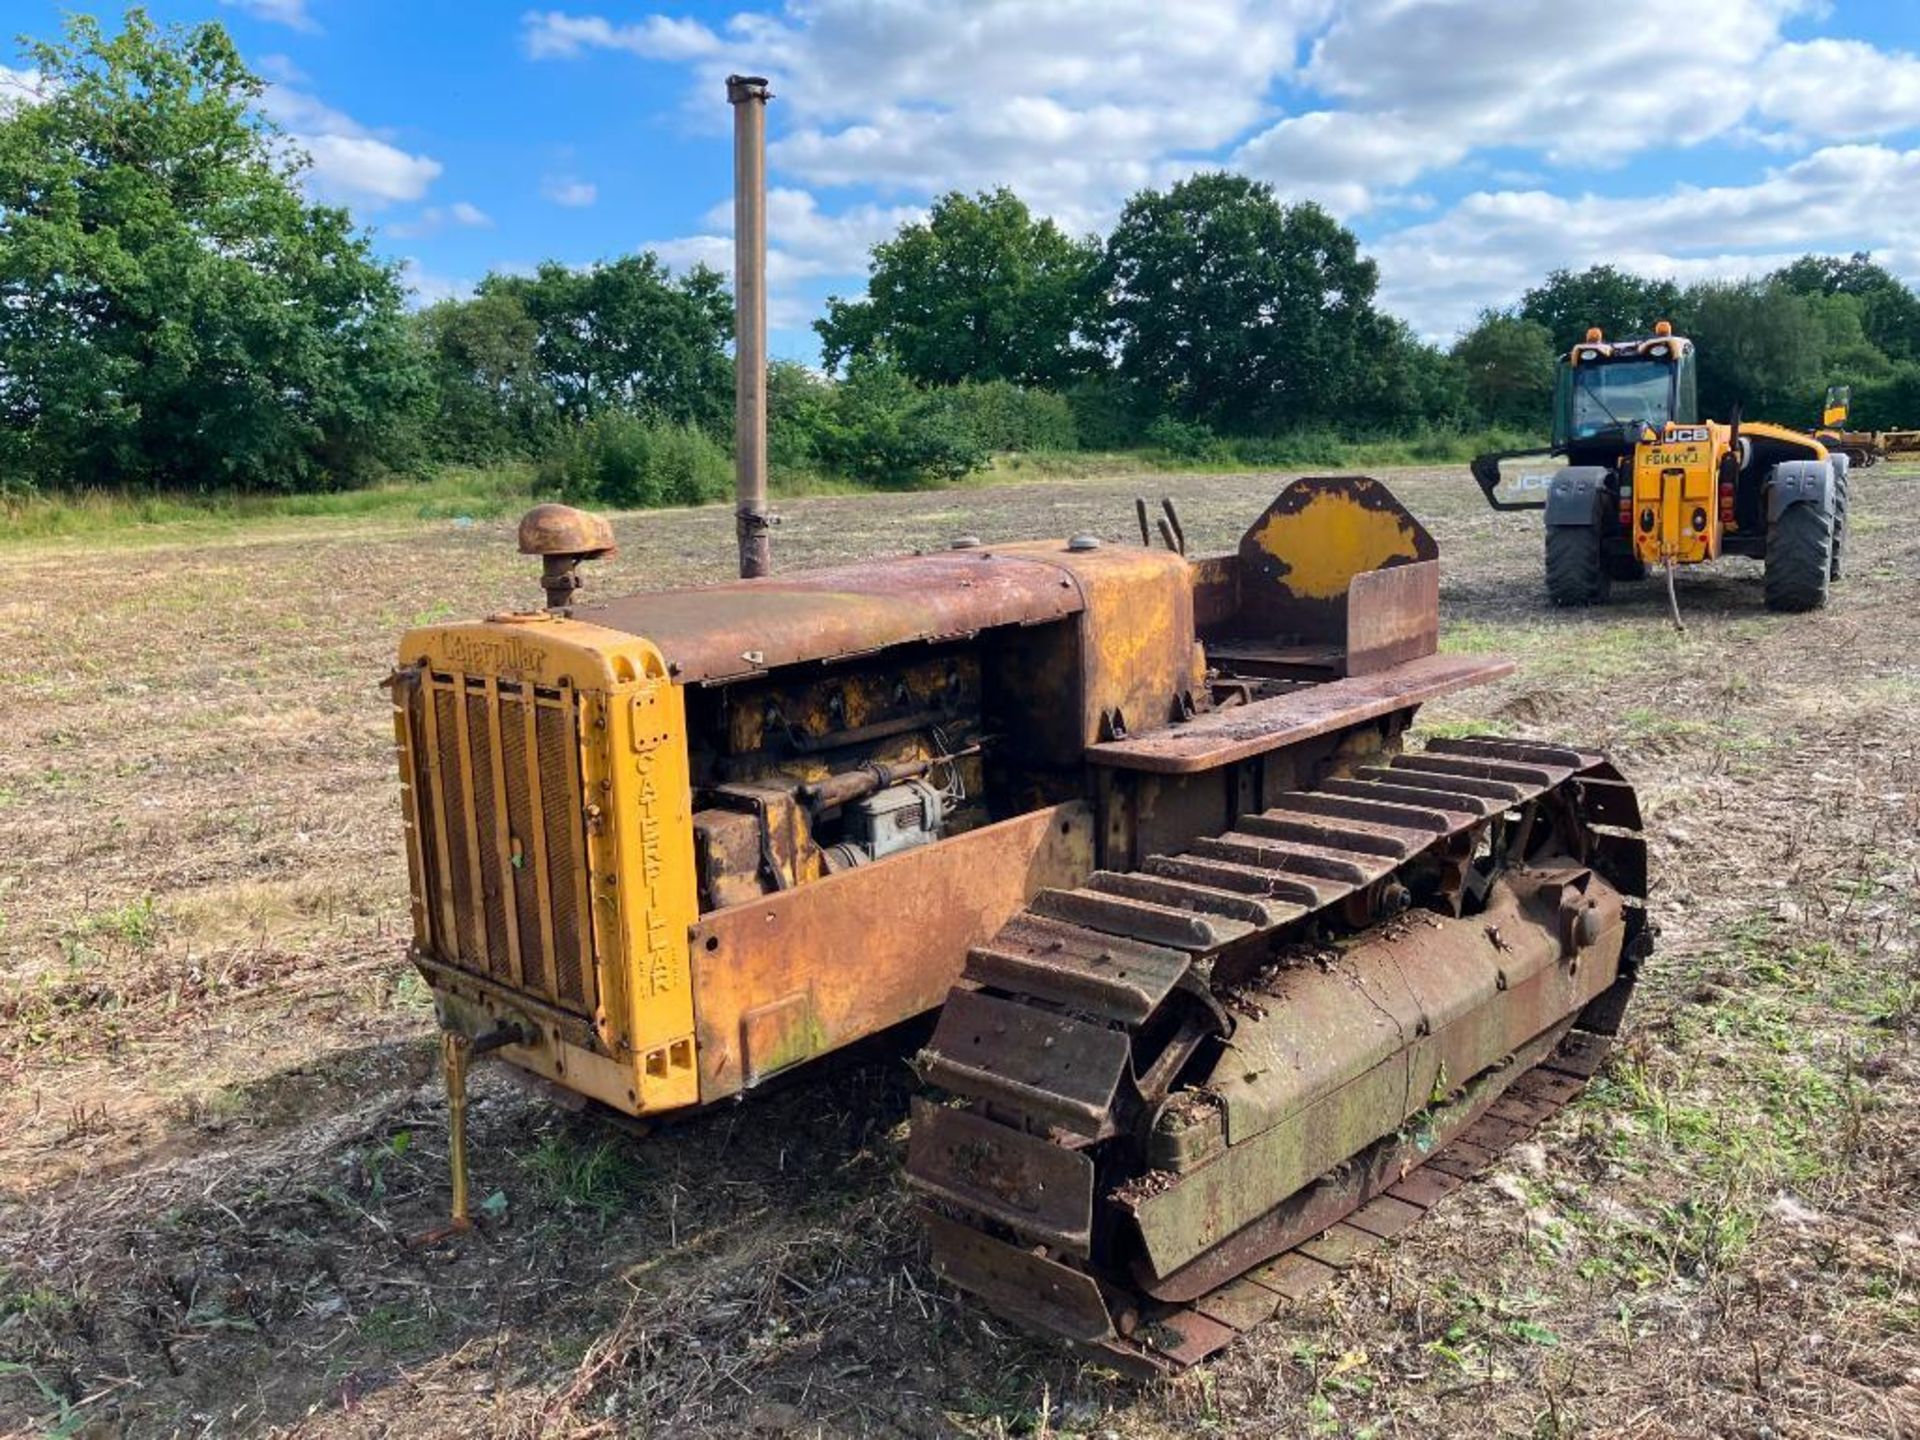 1939 Caterpillar R4 metal tracked crawler with 16" tracks and swinging drawbar. Serial No: 6G1021WS - Image 3 of 14